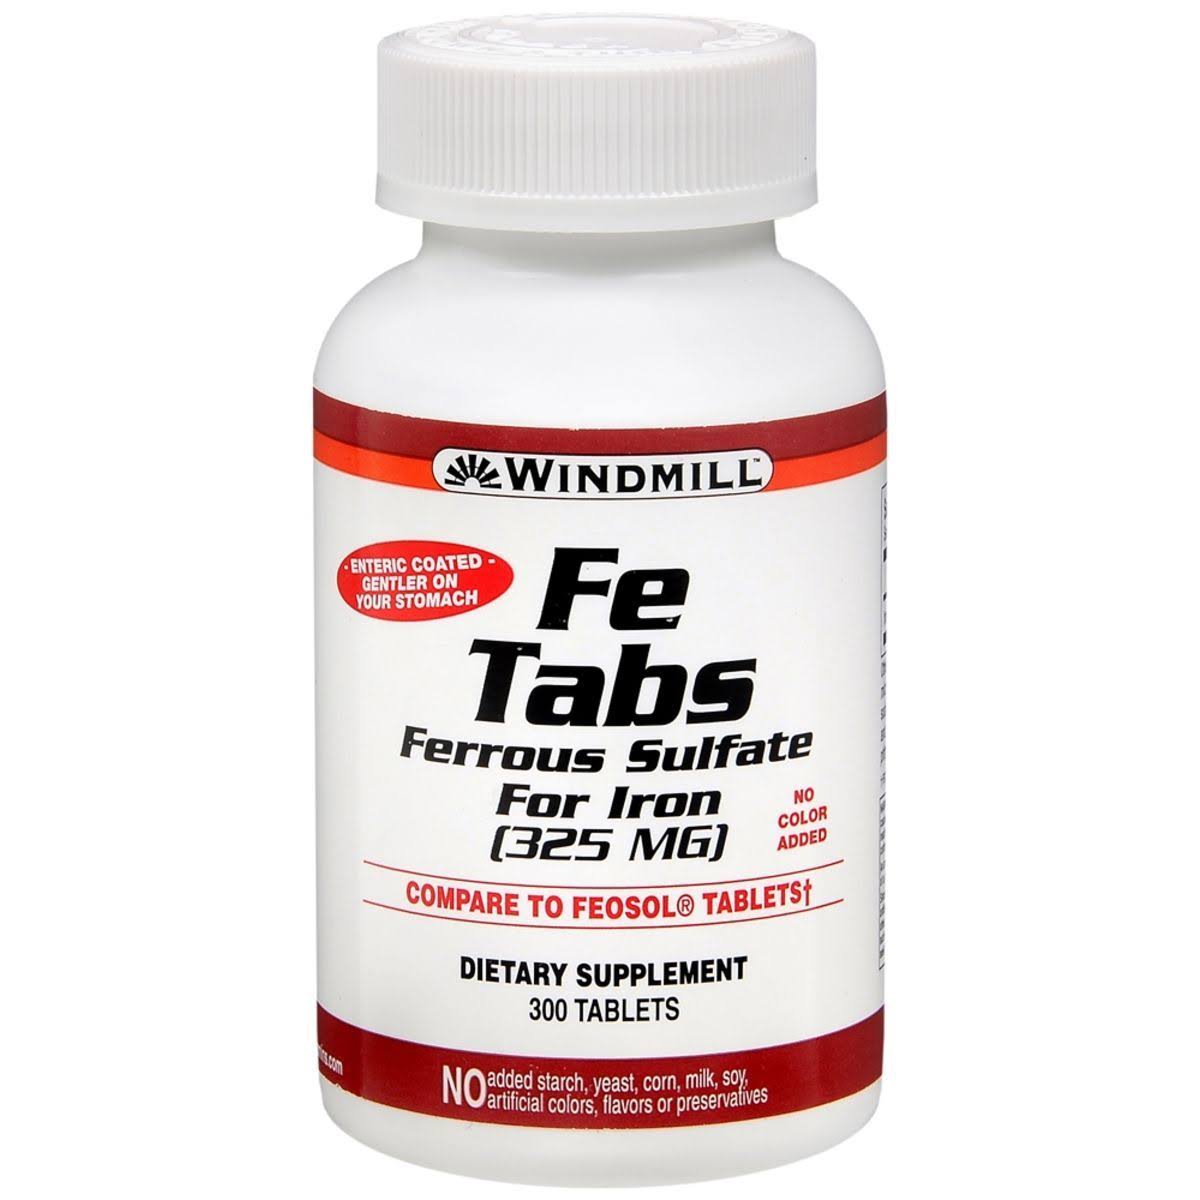 Windmill Ferrous Sulphate Supplement Therapy Tablets - 300 Tablets